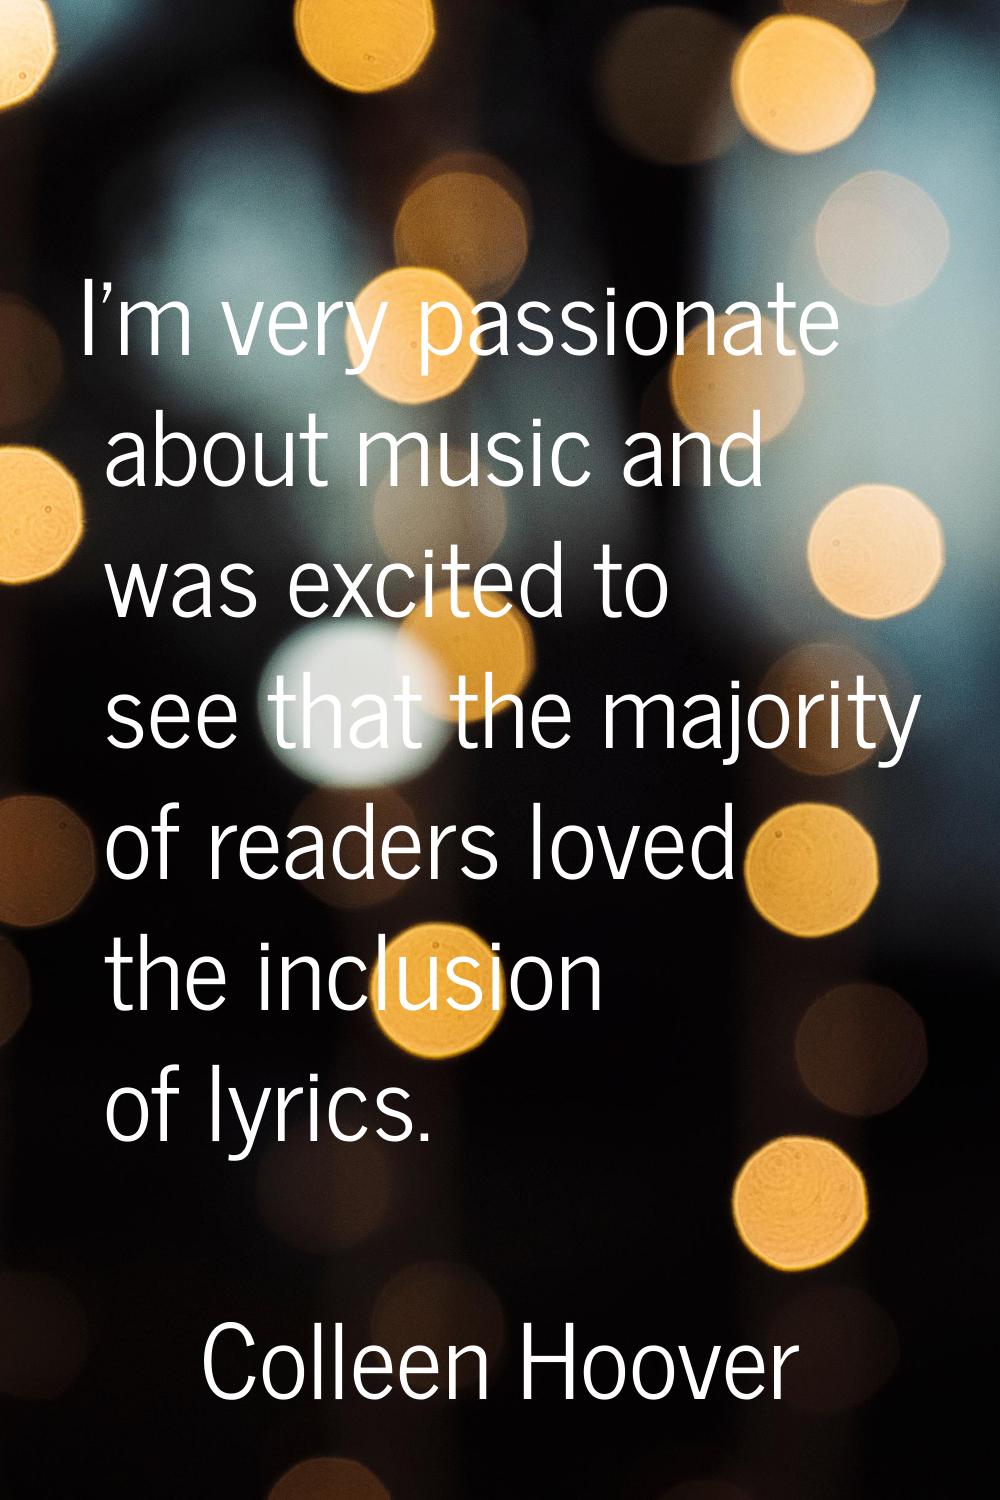 I'm very passionate about music and was excited to see that the majority of readers loved the inclu